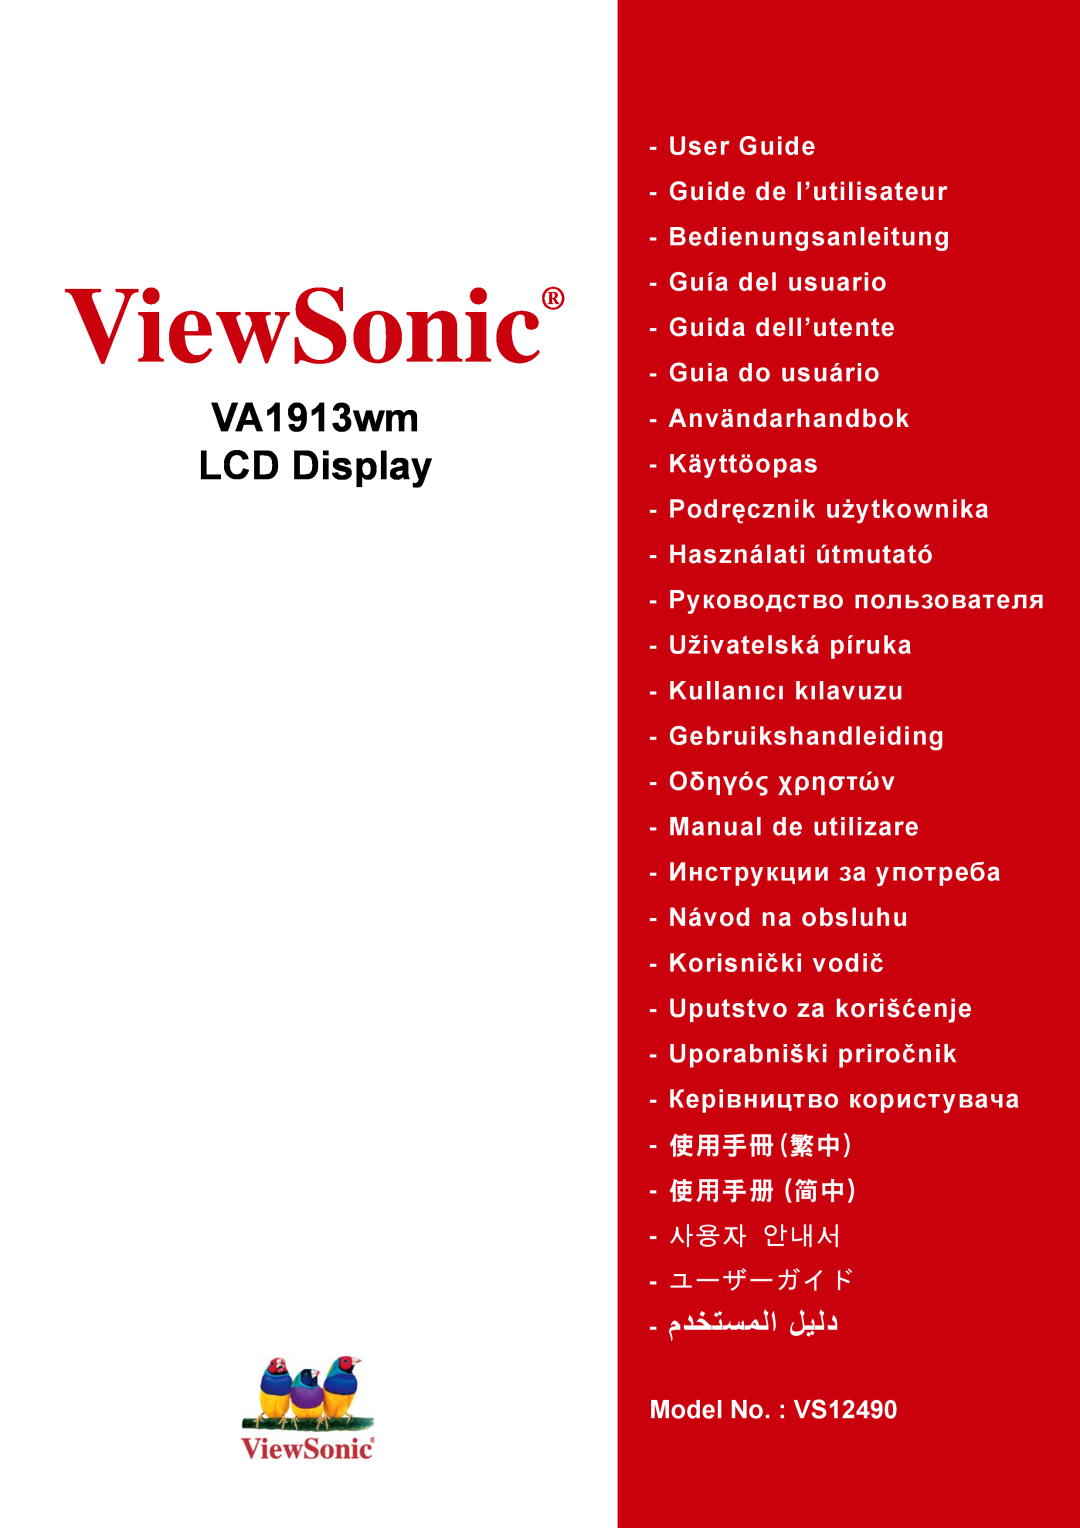 ViewSonic VA1913wm manual Widescreen for work and play, 19 18.5 VIEWABLE 169 WIDESCREEN LCD, Work faster. Play more 